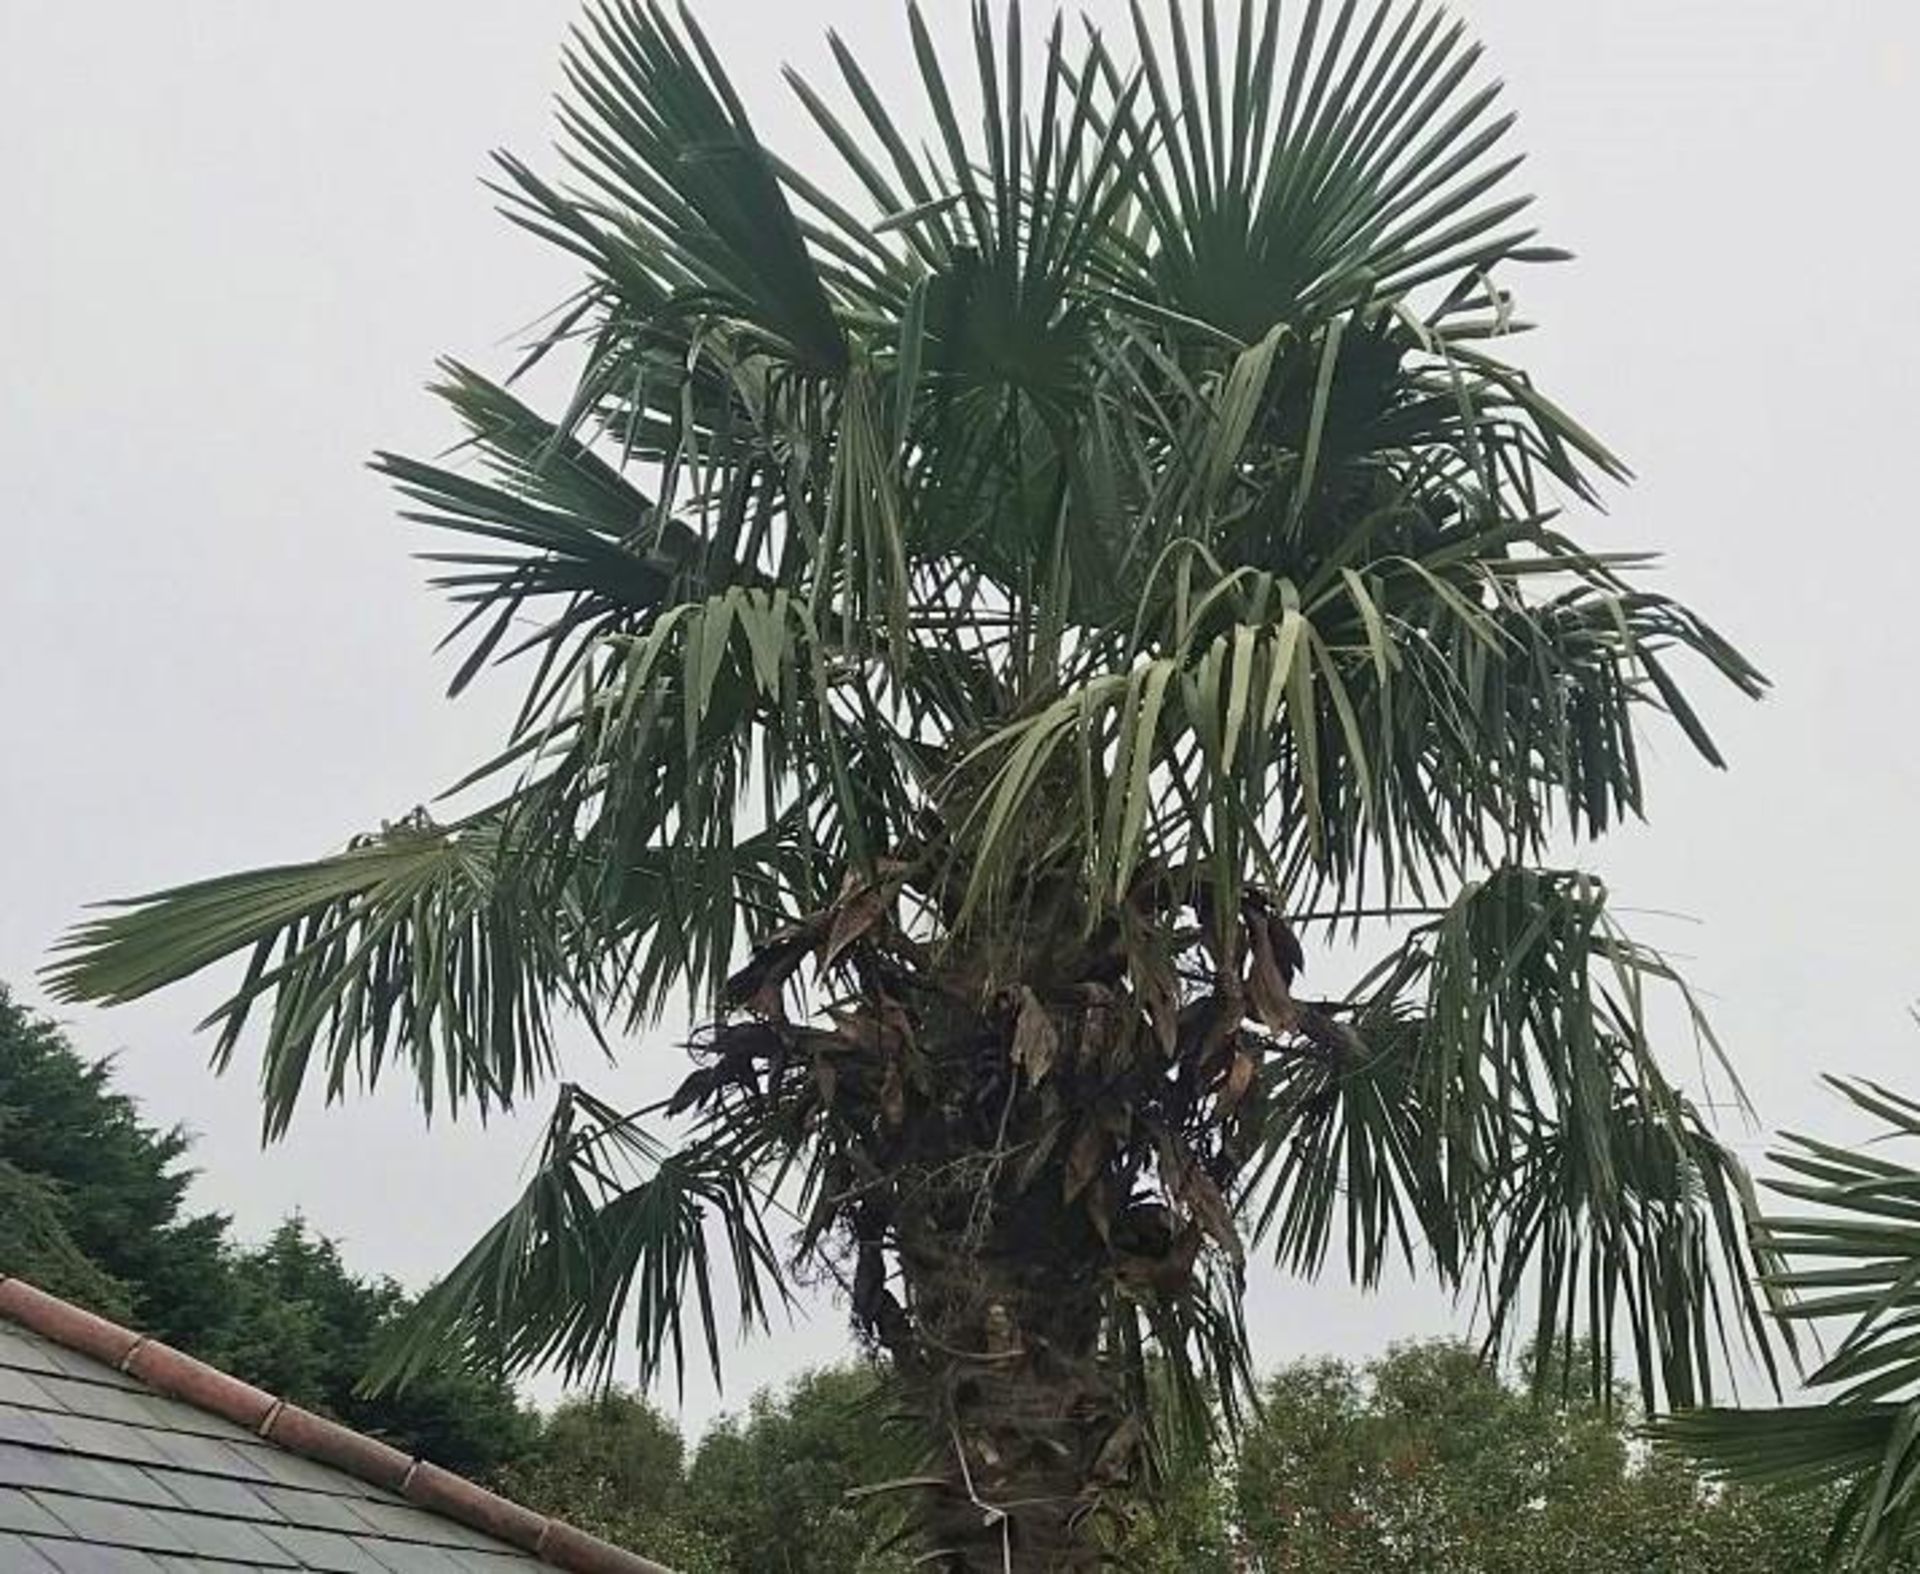 1 x Palm Tree - Approx 6-Metres in Height - Ref: JB159 - Pre-Owned - NO VAT ON THE HAMMER - - Image 2 of 3